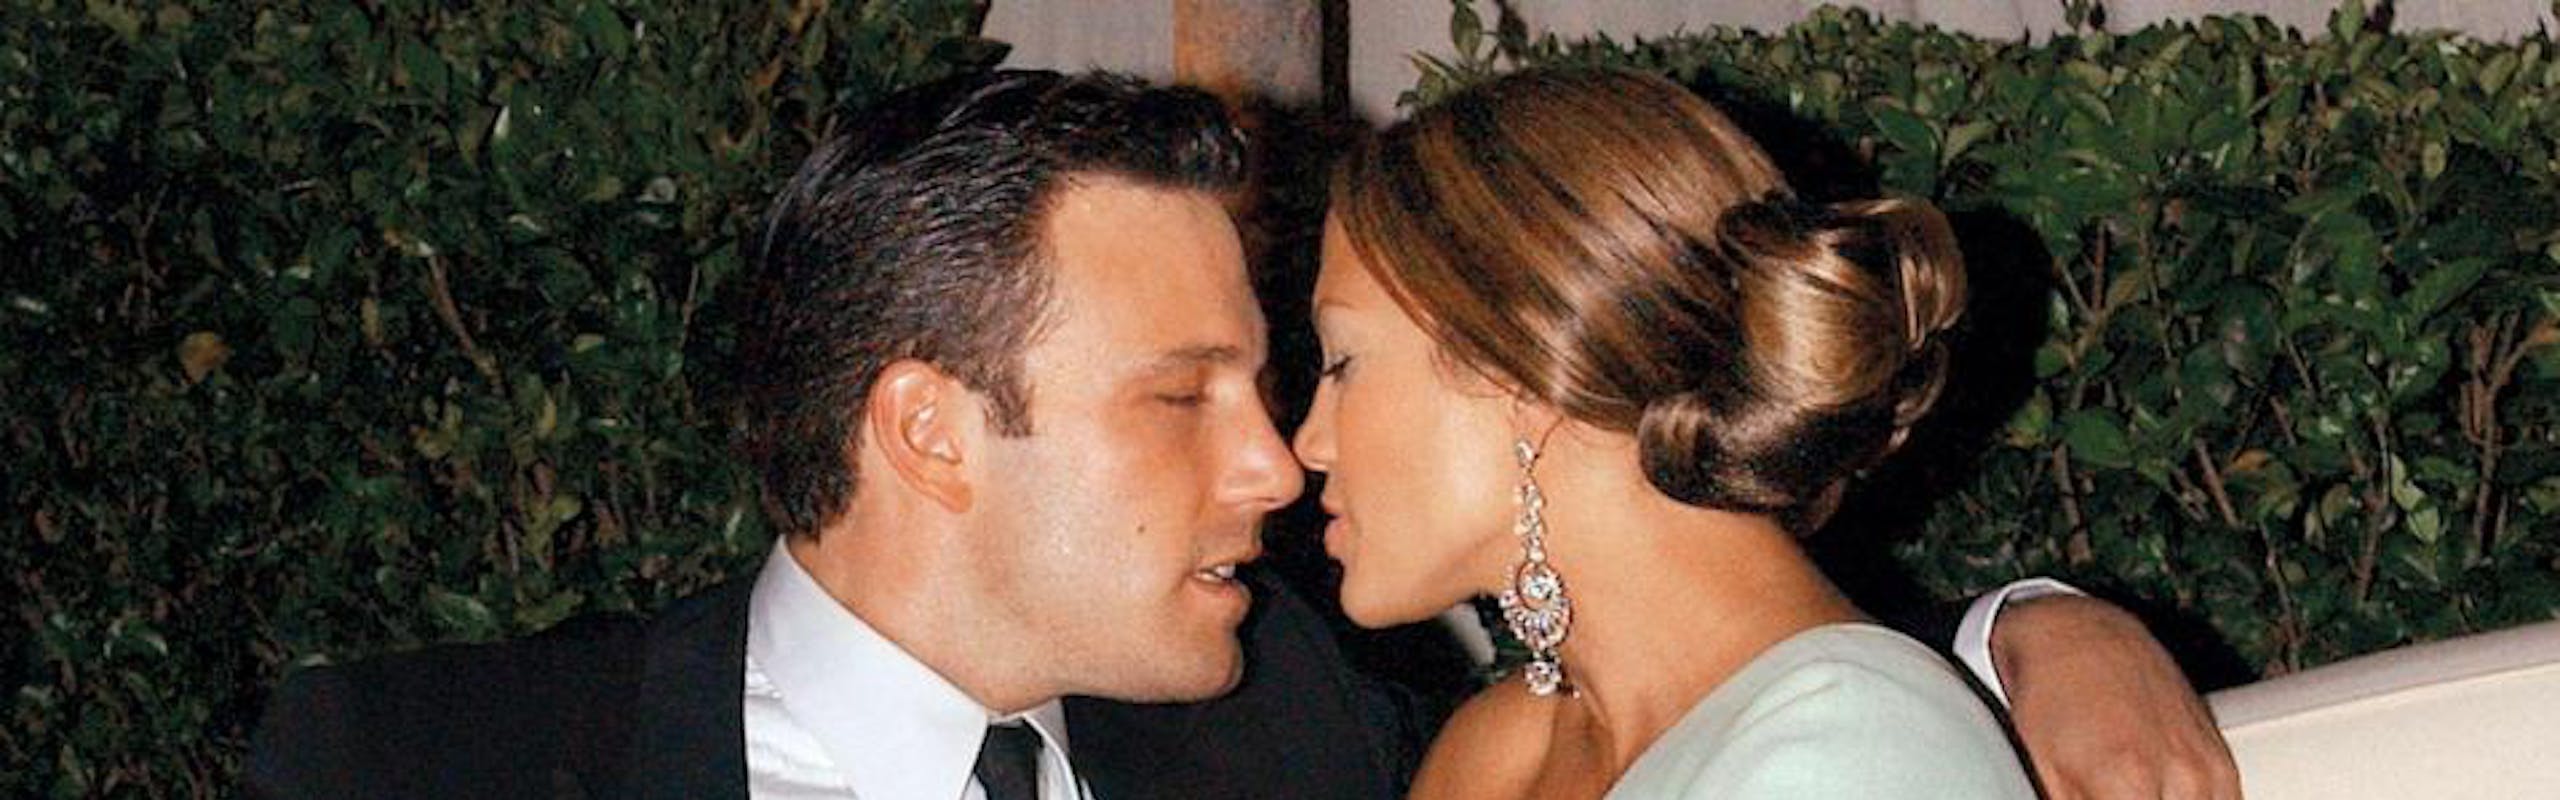 Ben Affleck and Jennifer Lopez about to share a kiss